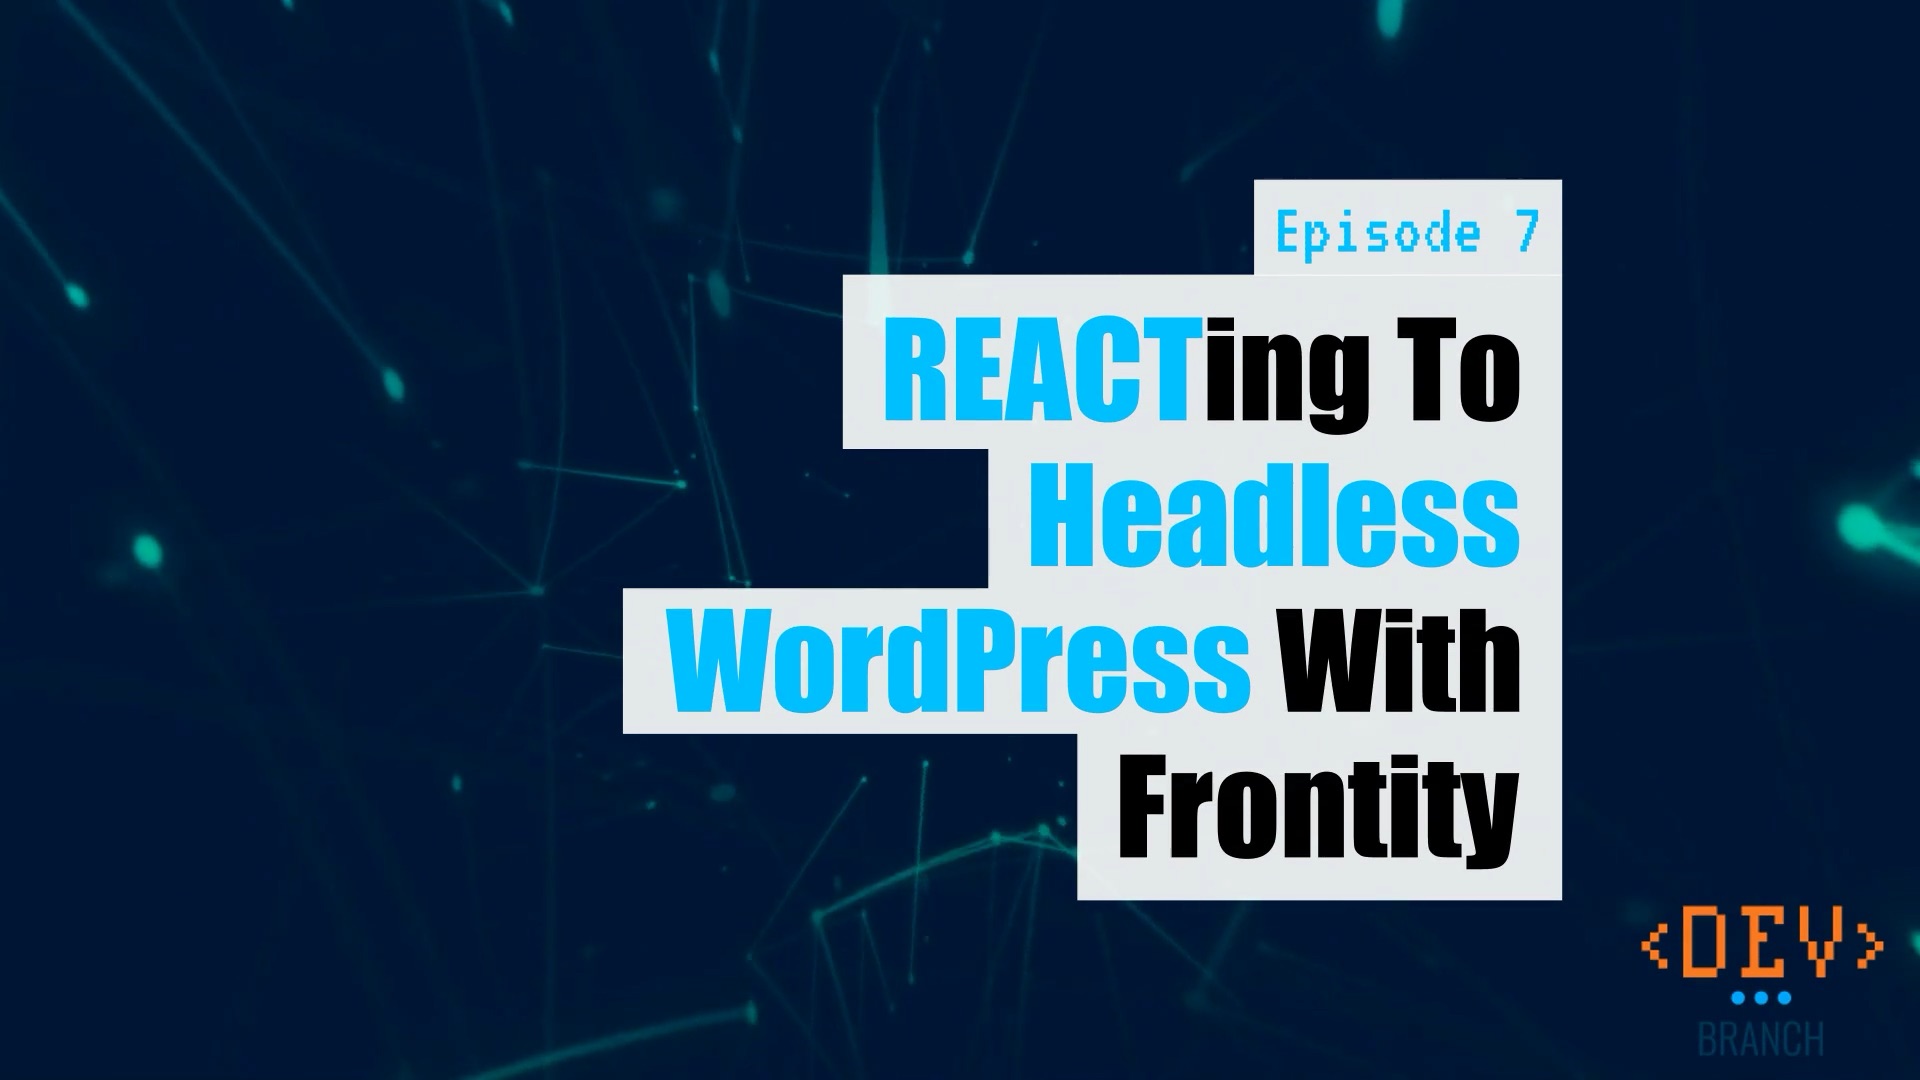 EP7 – REACTing to headless WordPress with Frontity